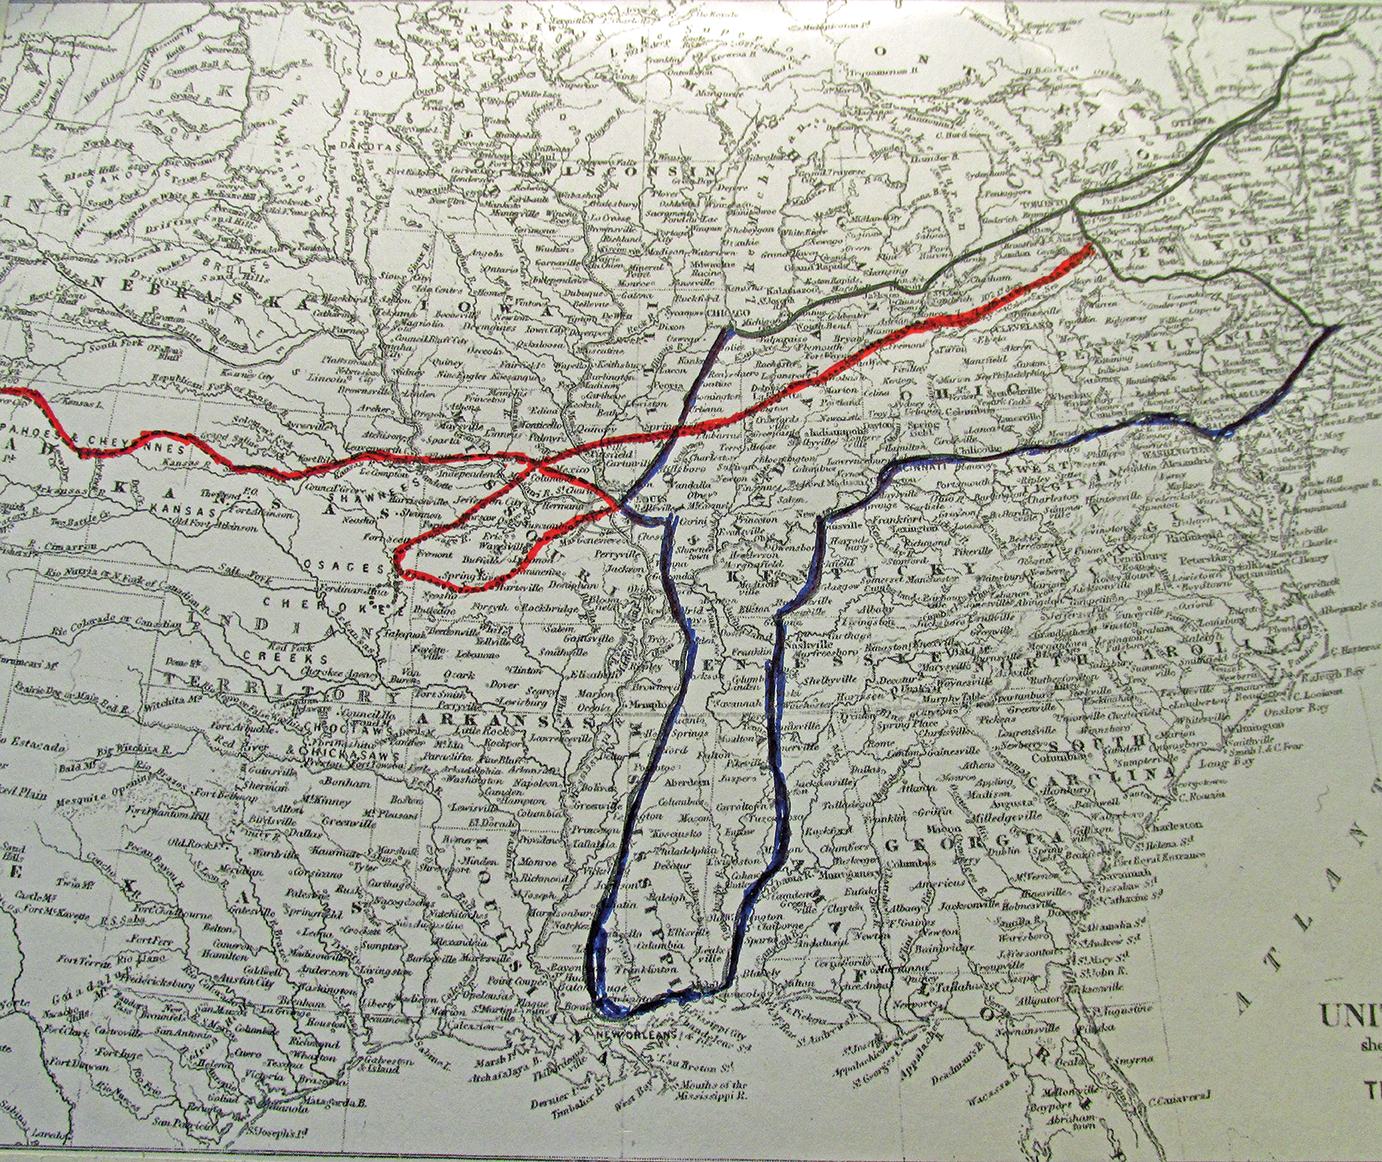 The red line is the hunter’s Western Route. The bolder blue line is the path of Col. Leech. The Northern heading line represents the course of the general Irish Party.